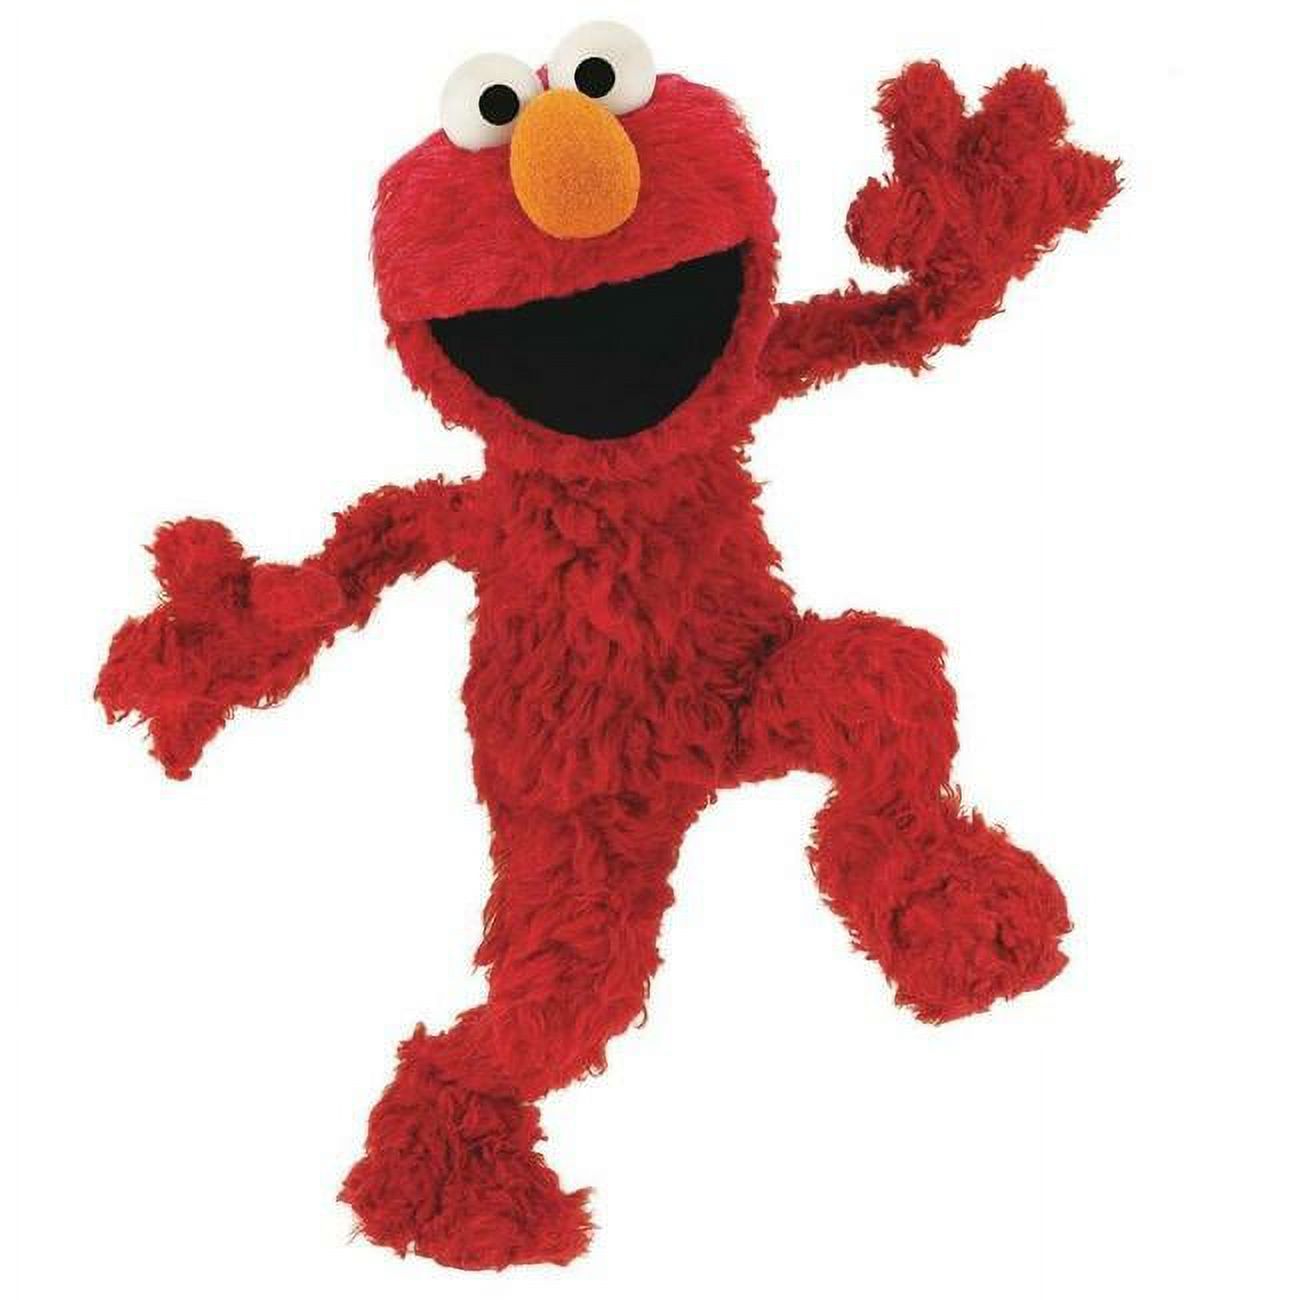 Elmo Giant Wall Decal - image 3 of 6